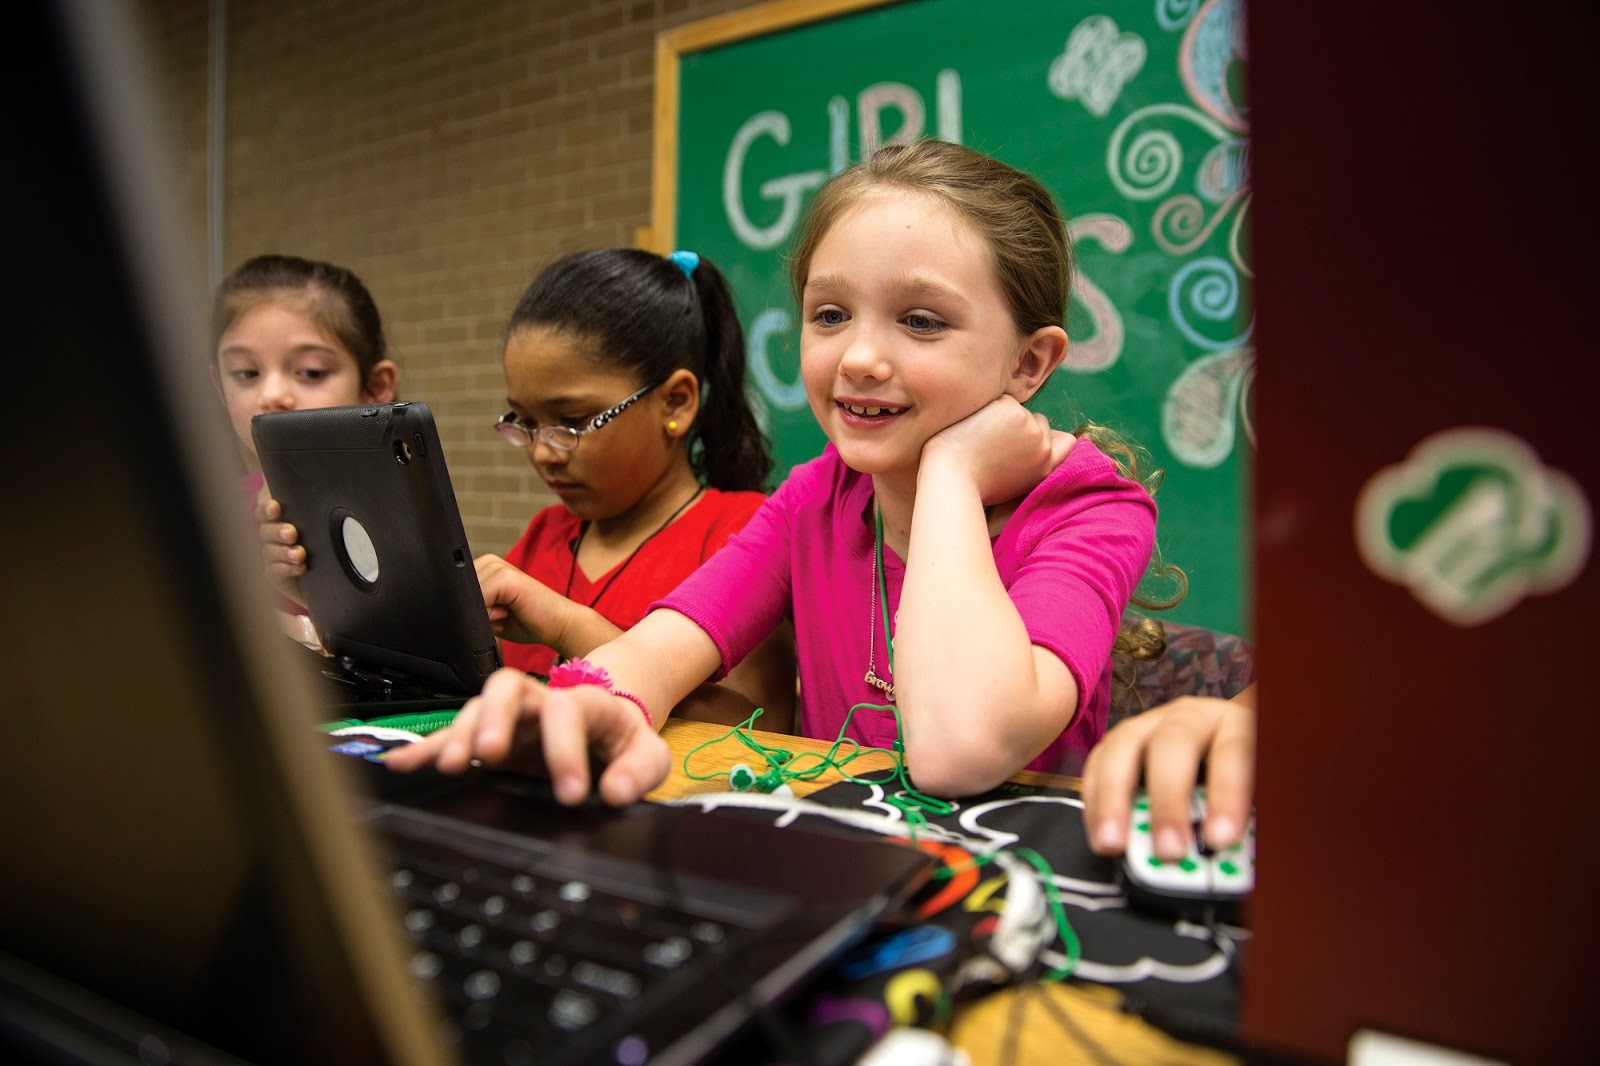 Girl Scouts can start earning cybersecurity badges in fall 2018